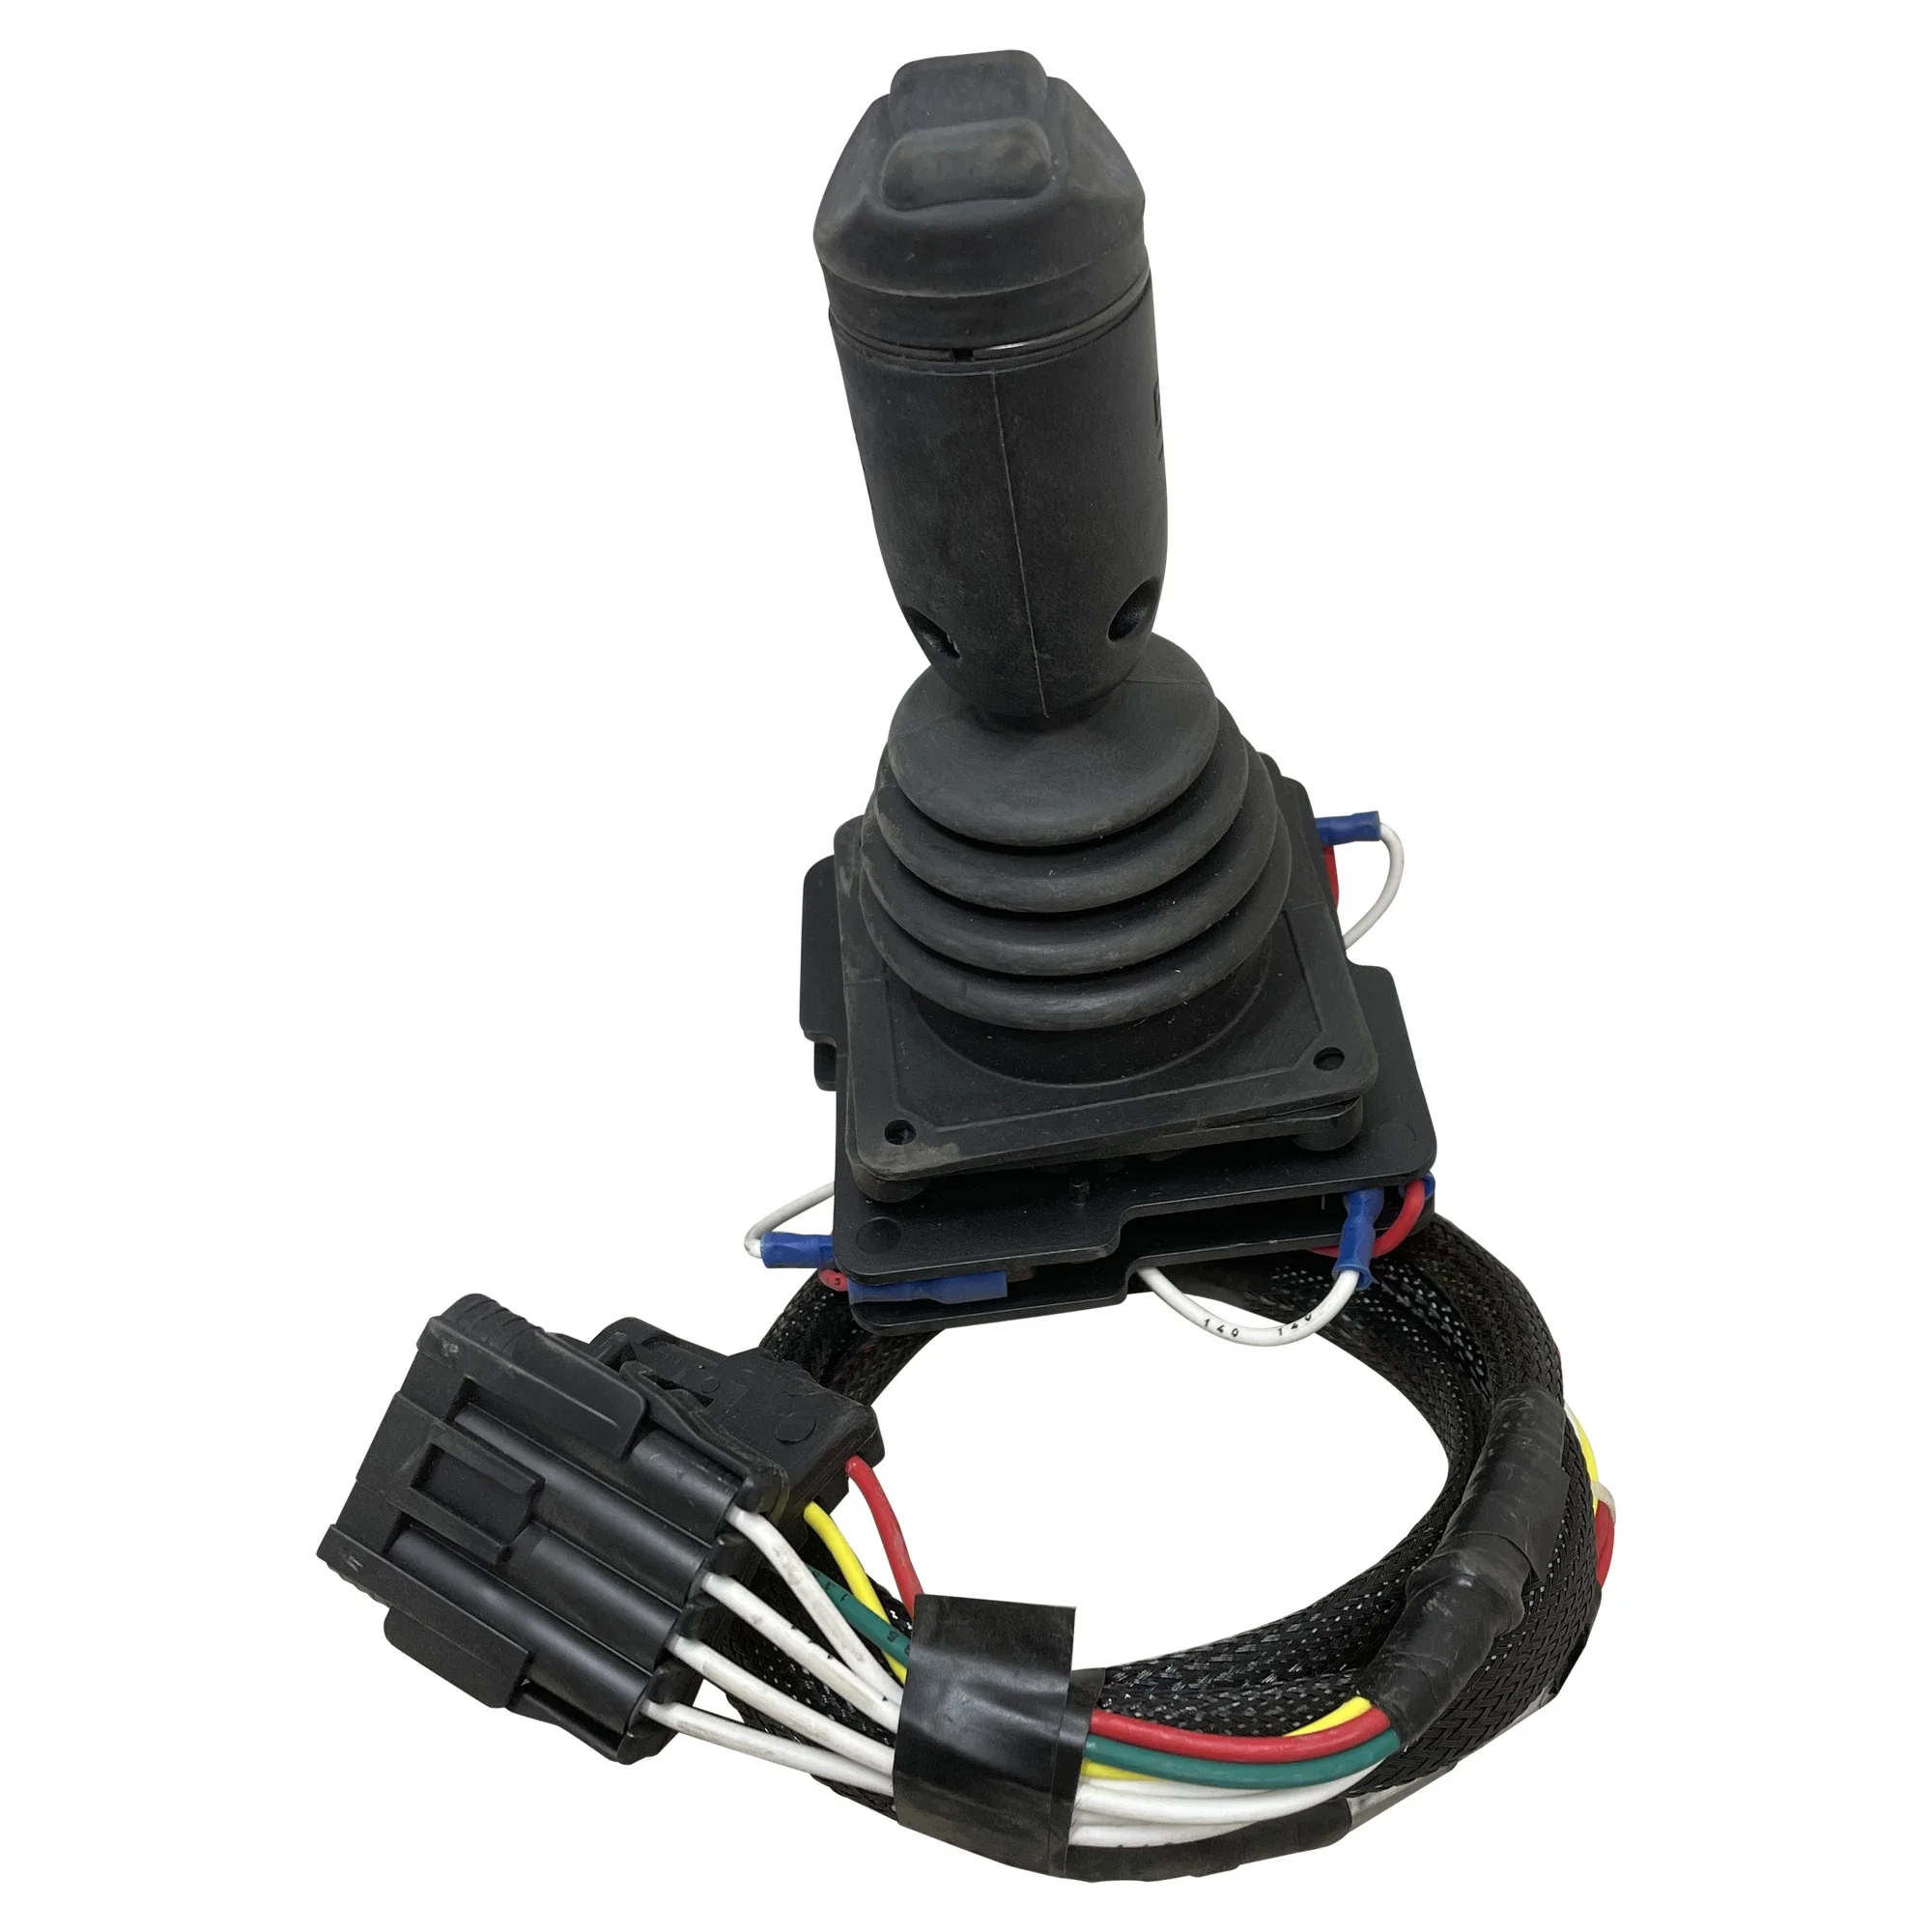 Wastebuilt® Replacement for Curotto-Can Joystick with Harness